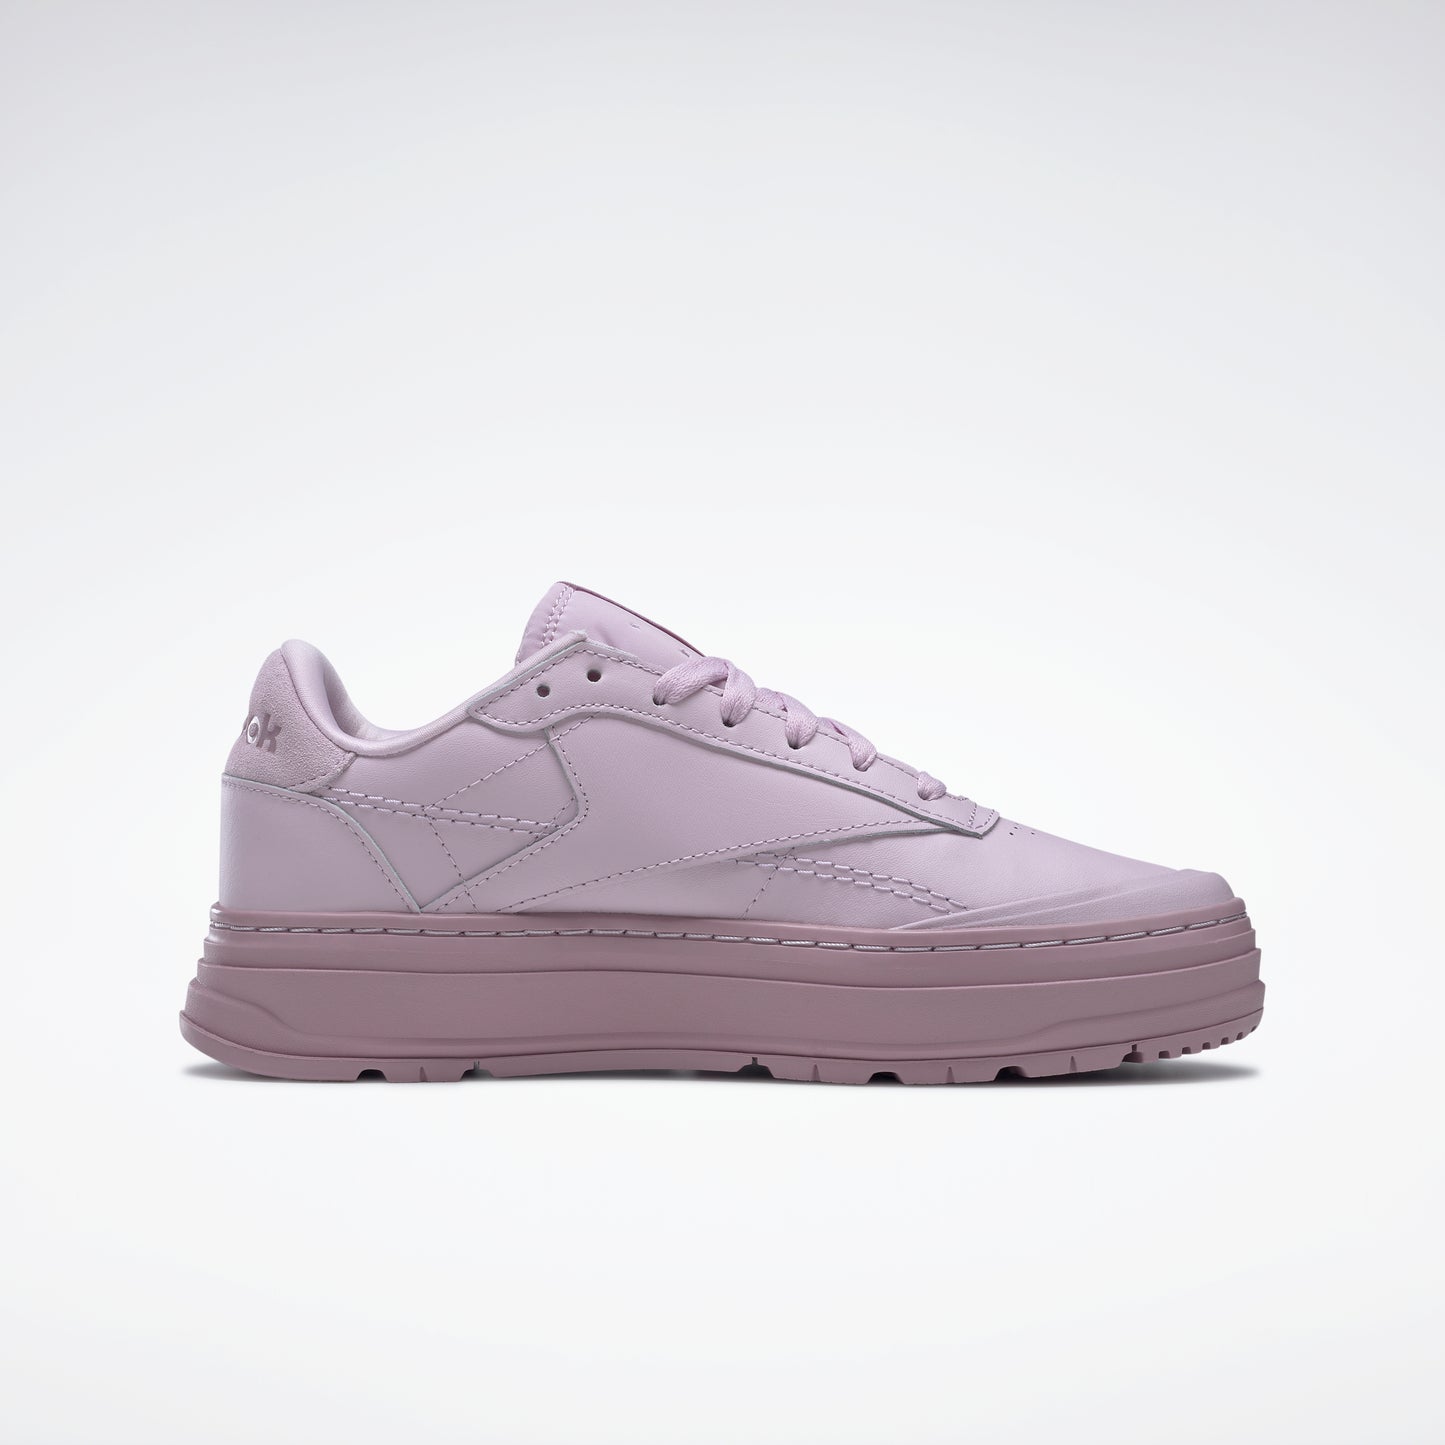 Club C Double Geo Shoes Shell Purple/Infused Lilac